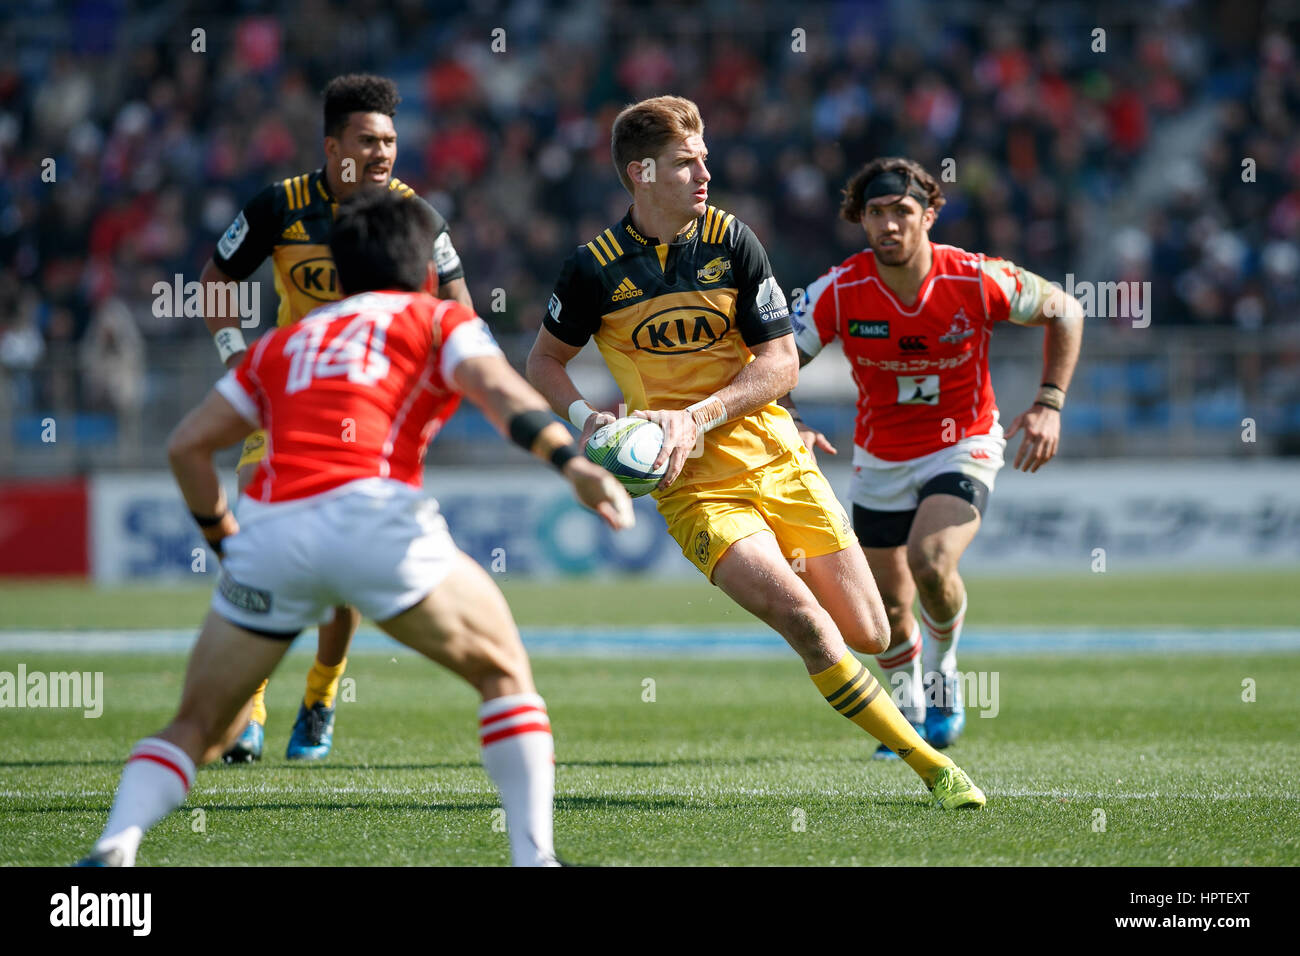 James Blackwell of the Hurricanes (C) in action for HITO-Communications Sunwolves vs Hurricanes in the Super Rugby 2017 Round 1 game at Prince Chichibu Memorial Stadium on February 25, 2017 in Tokyo, Japan. The Hurricanes won the match. Credit: Rodrigo Reyes Marin/AFLO/Alamy Live News Stock Photo